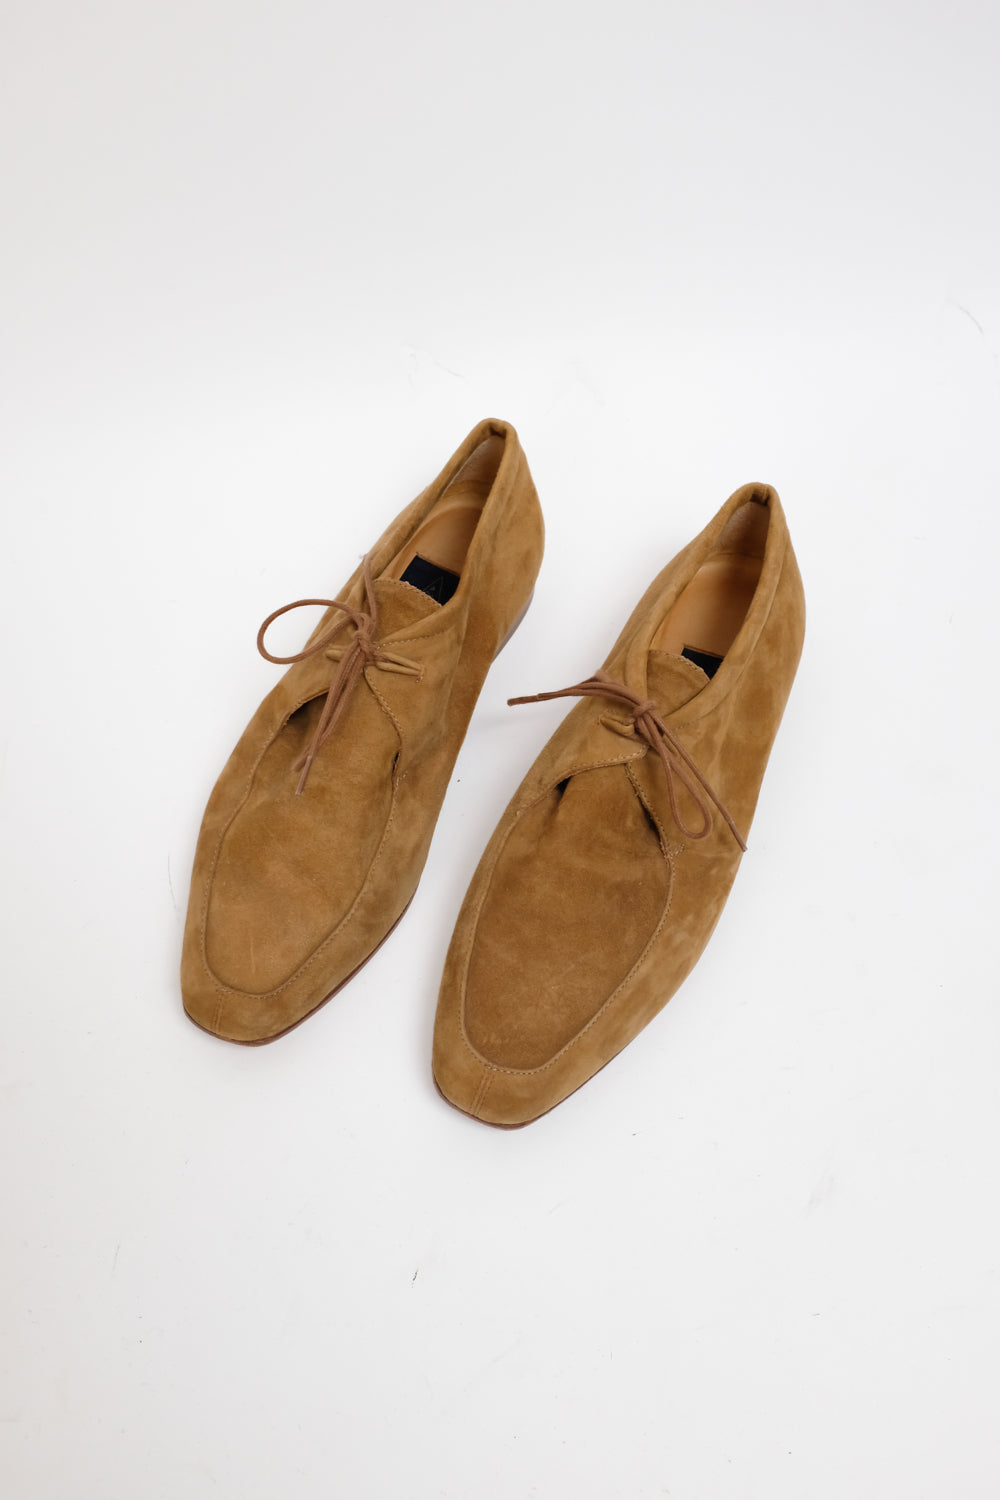 ITALY CAMEL SUEDE LACE UP BROGUES 39,5